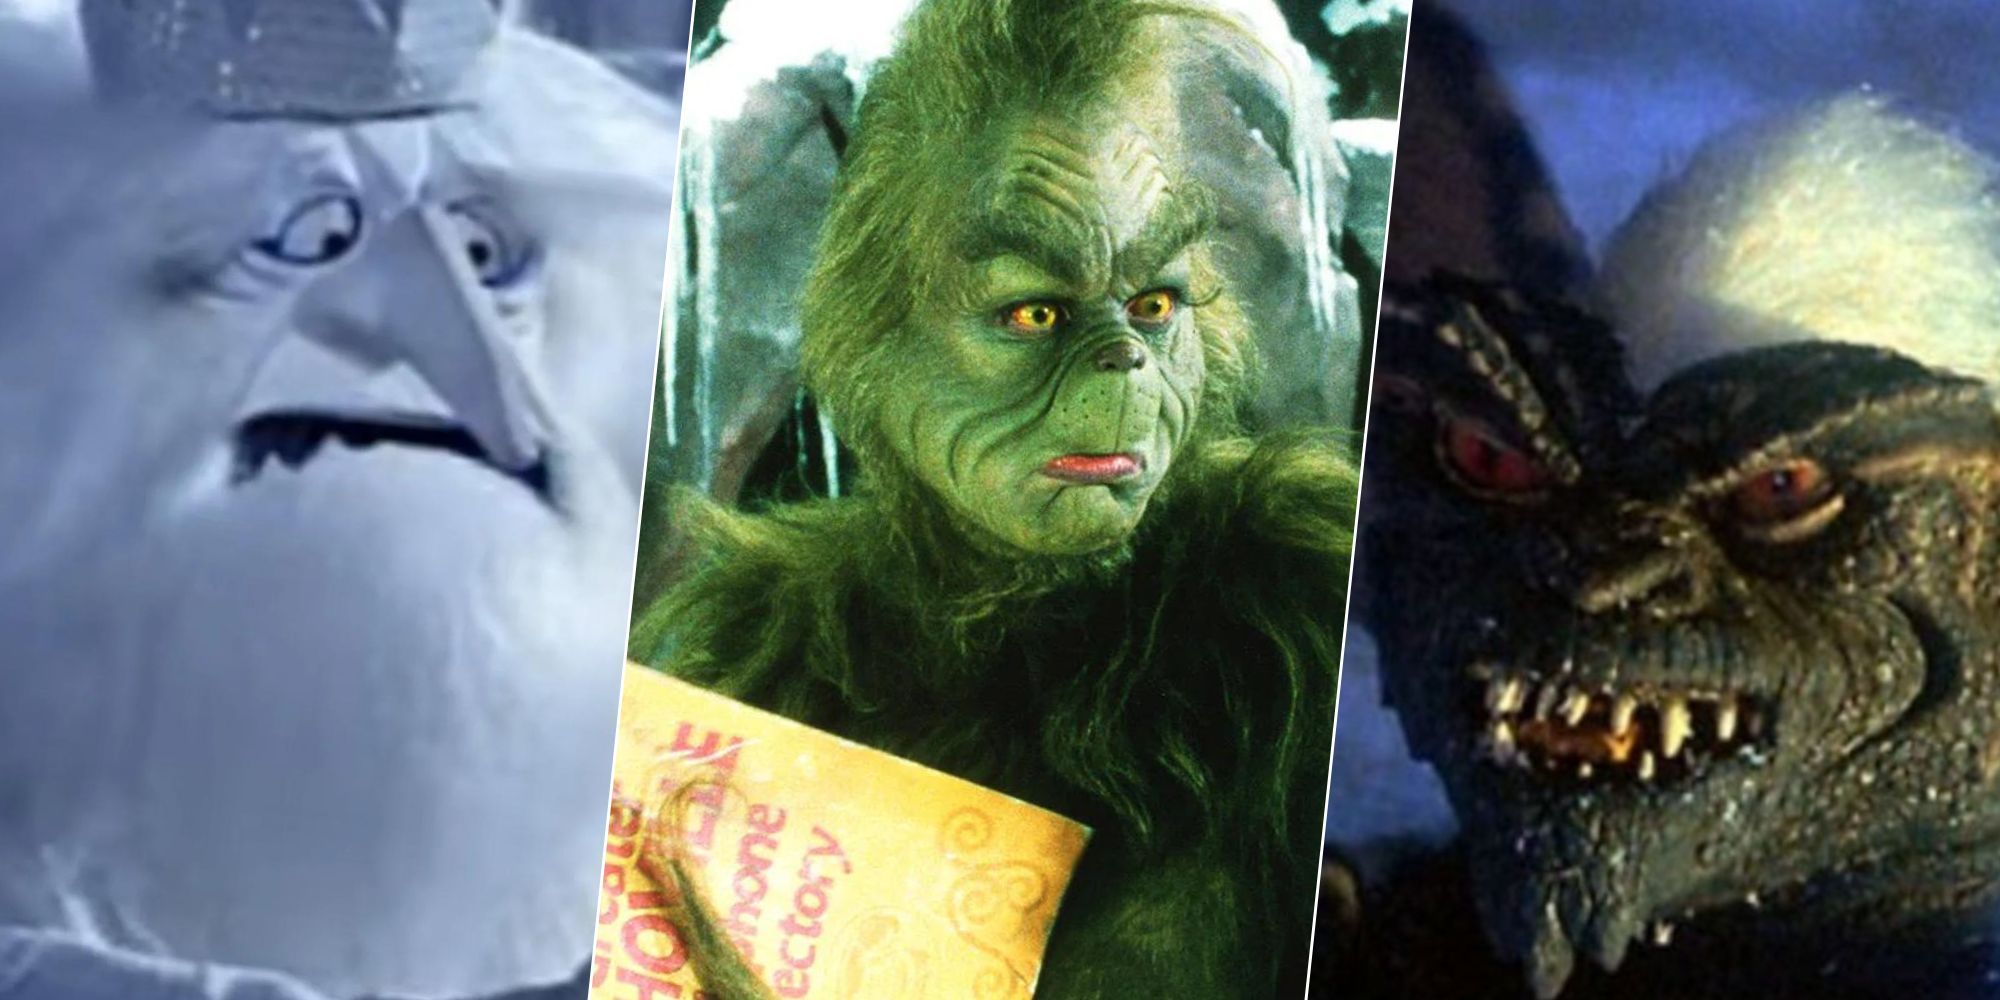 10 Creepiest Characters In Popular Christmas Movies